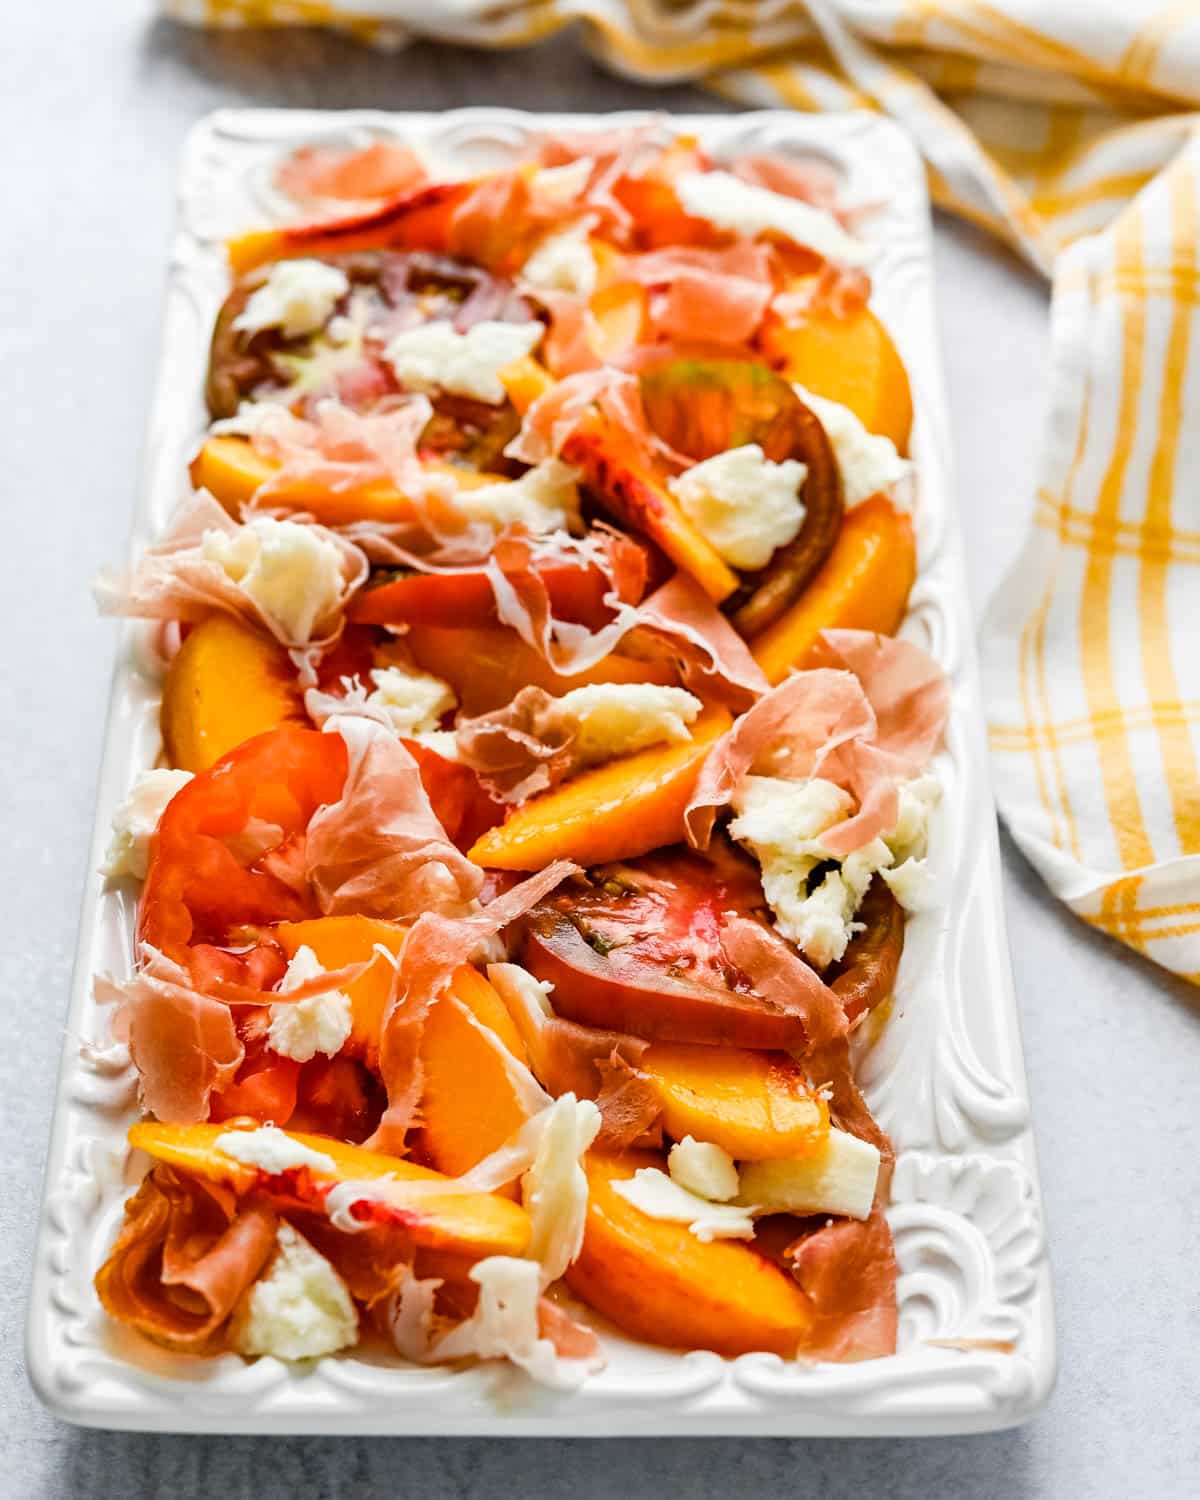 Arranging the peaches, heirloom tomatoes, mozzarella cheese and prosciutto on a platter.